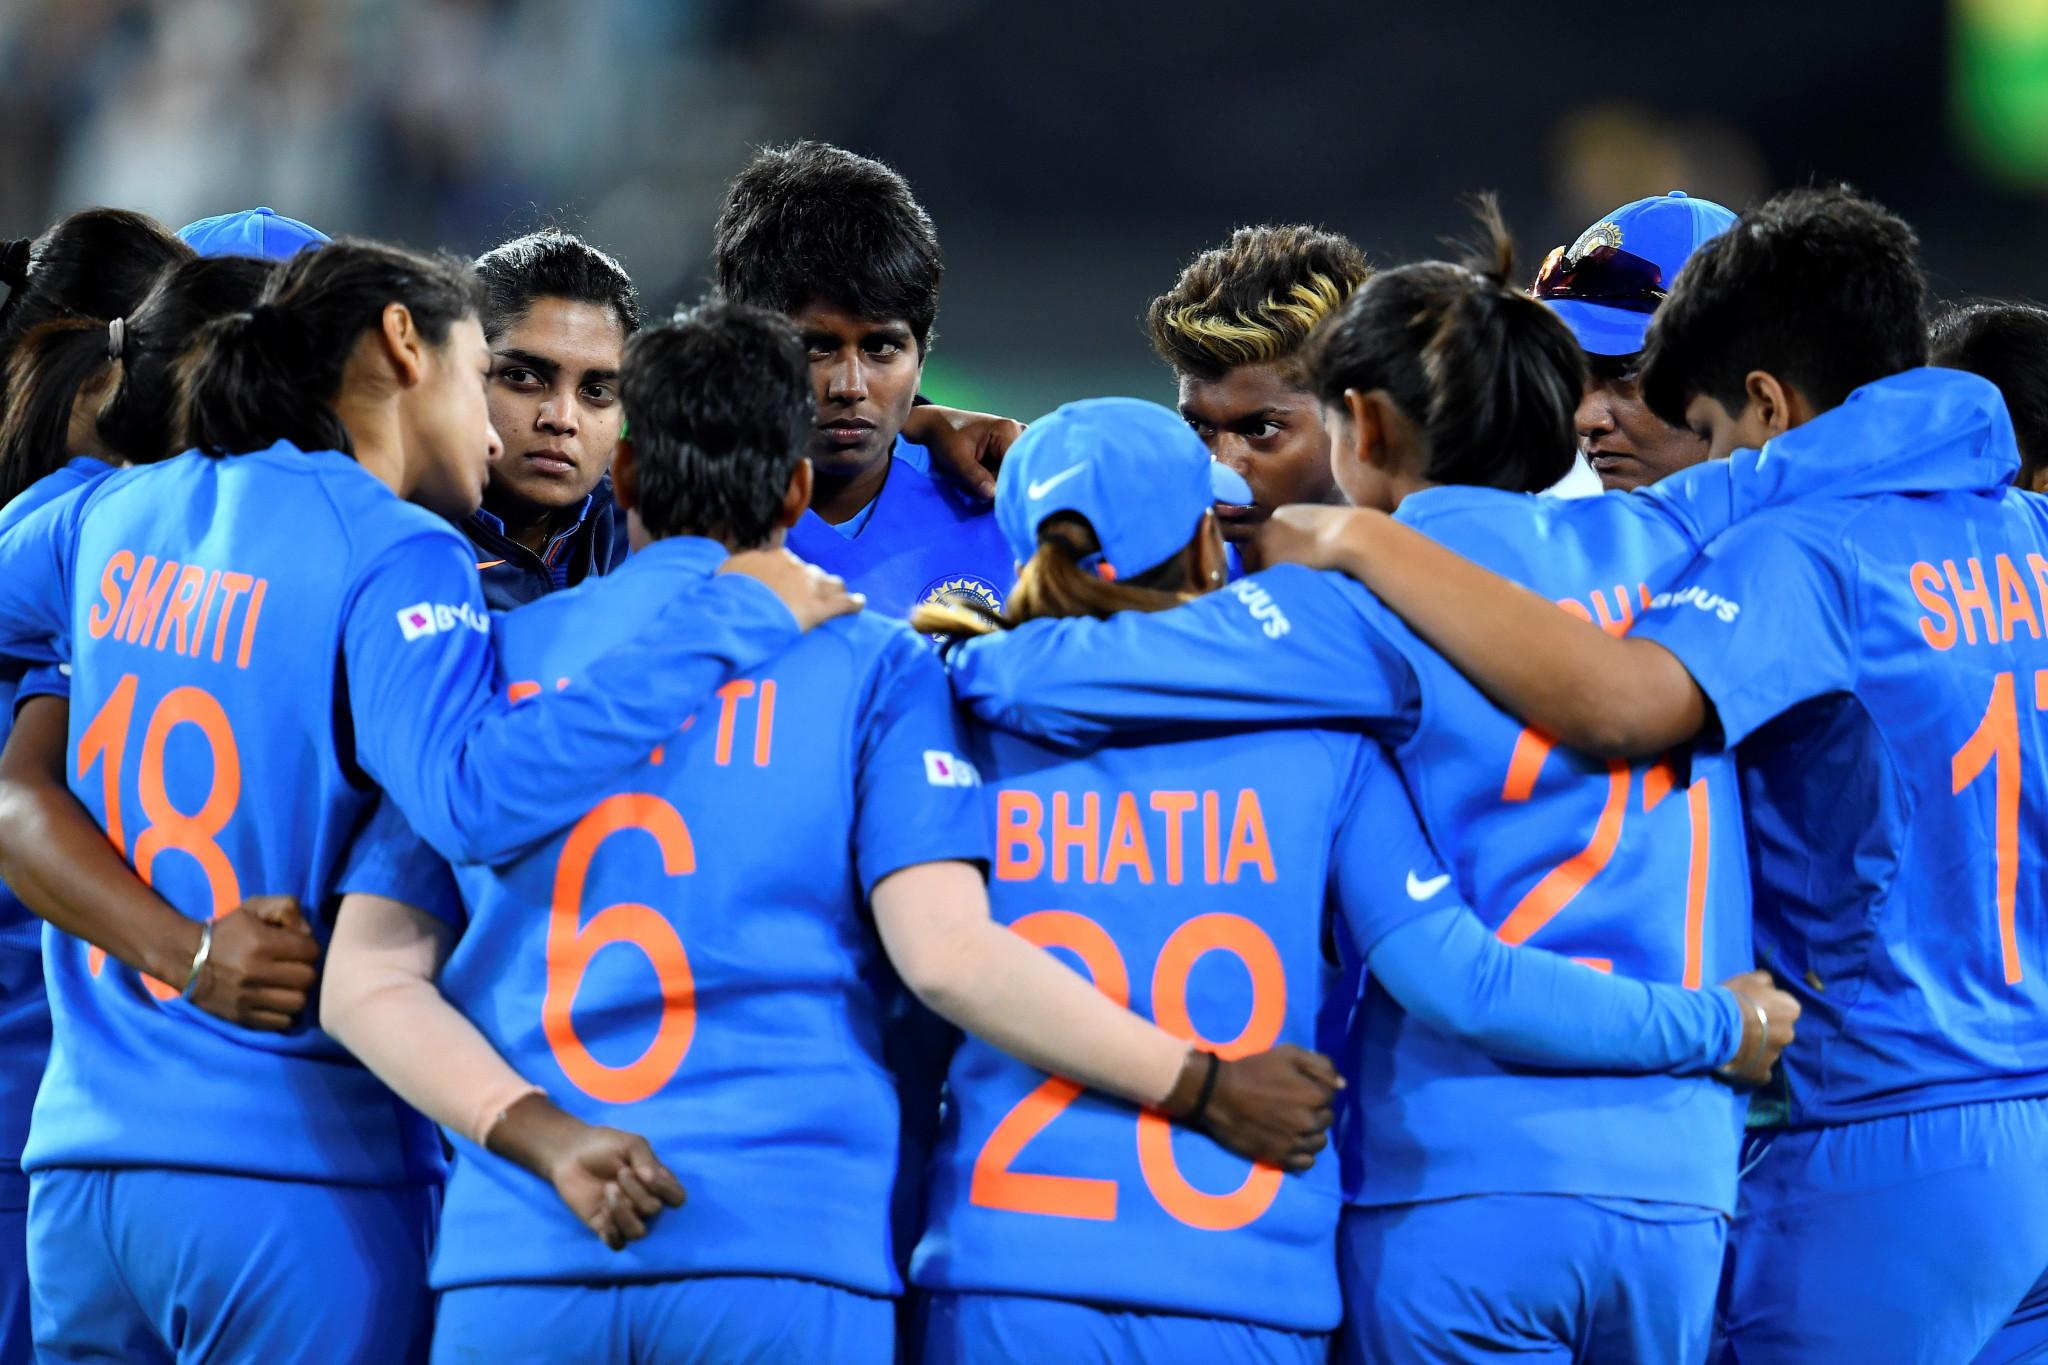 A BCCI official told an Indian newspaper that the country's men's and women's cricket teams would receive a boost if the sport is included at the Los Angeles 2028 Olympics ©Getty Images